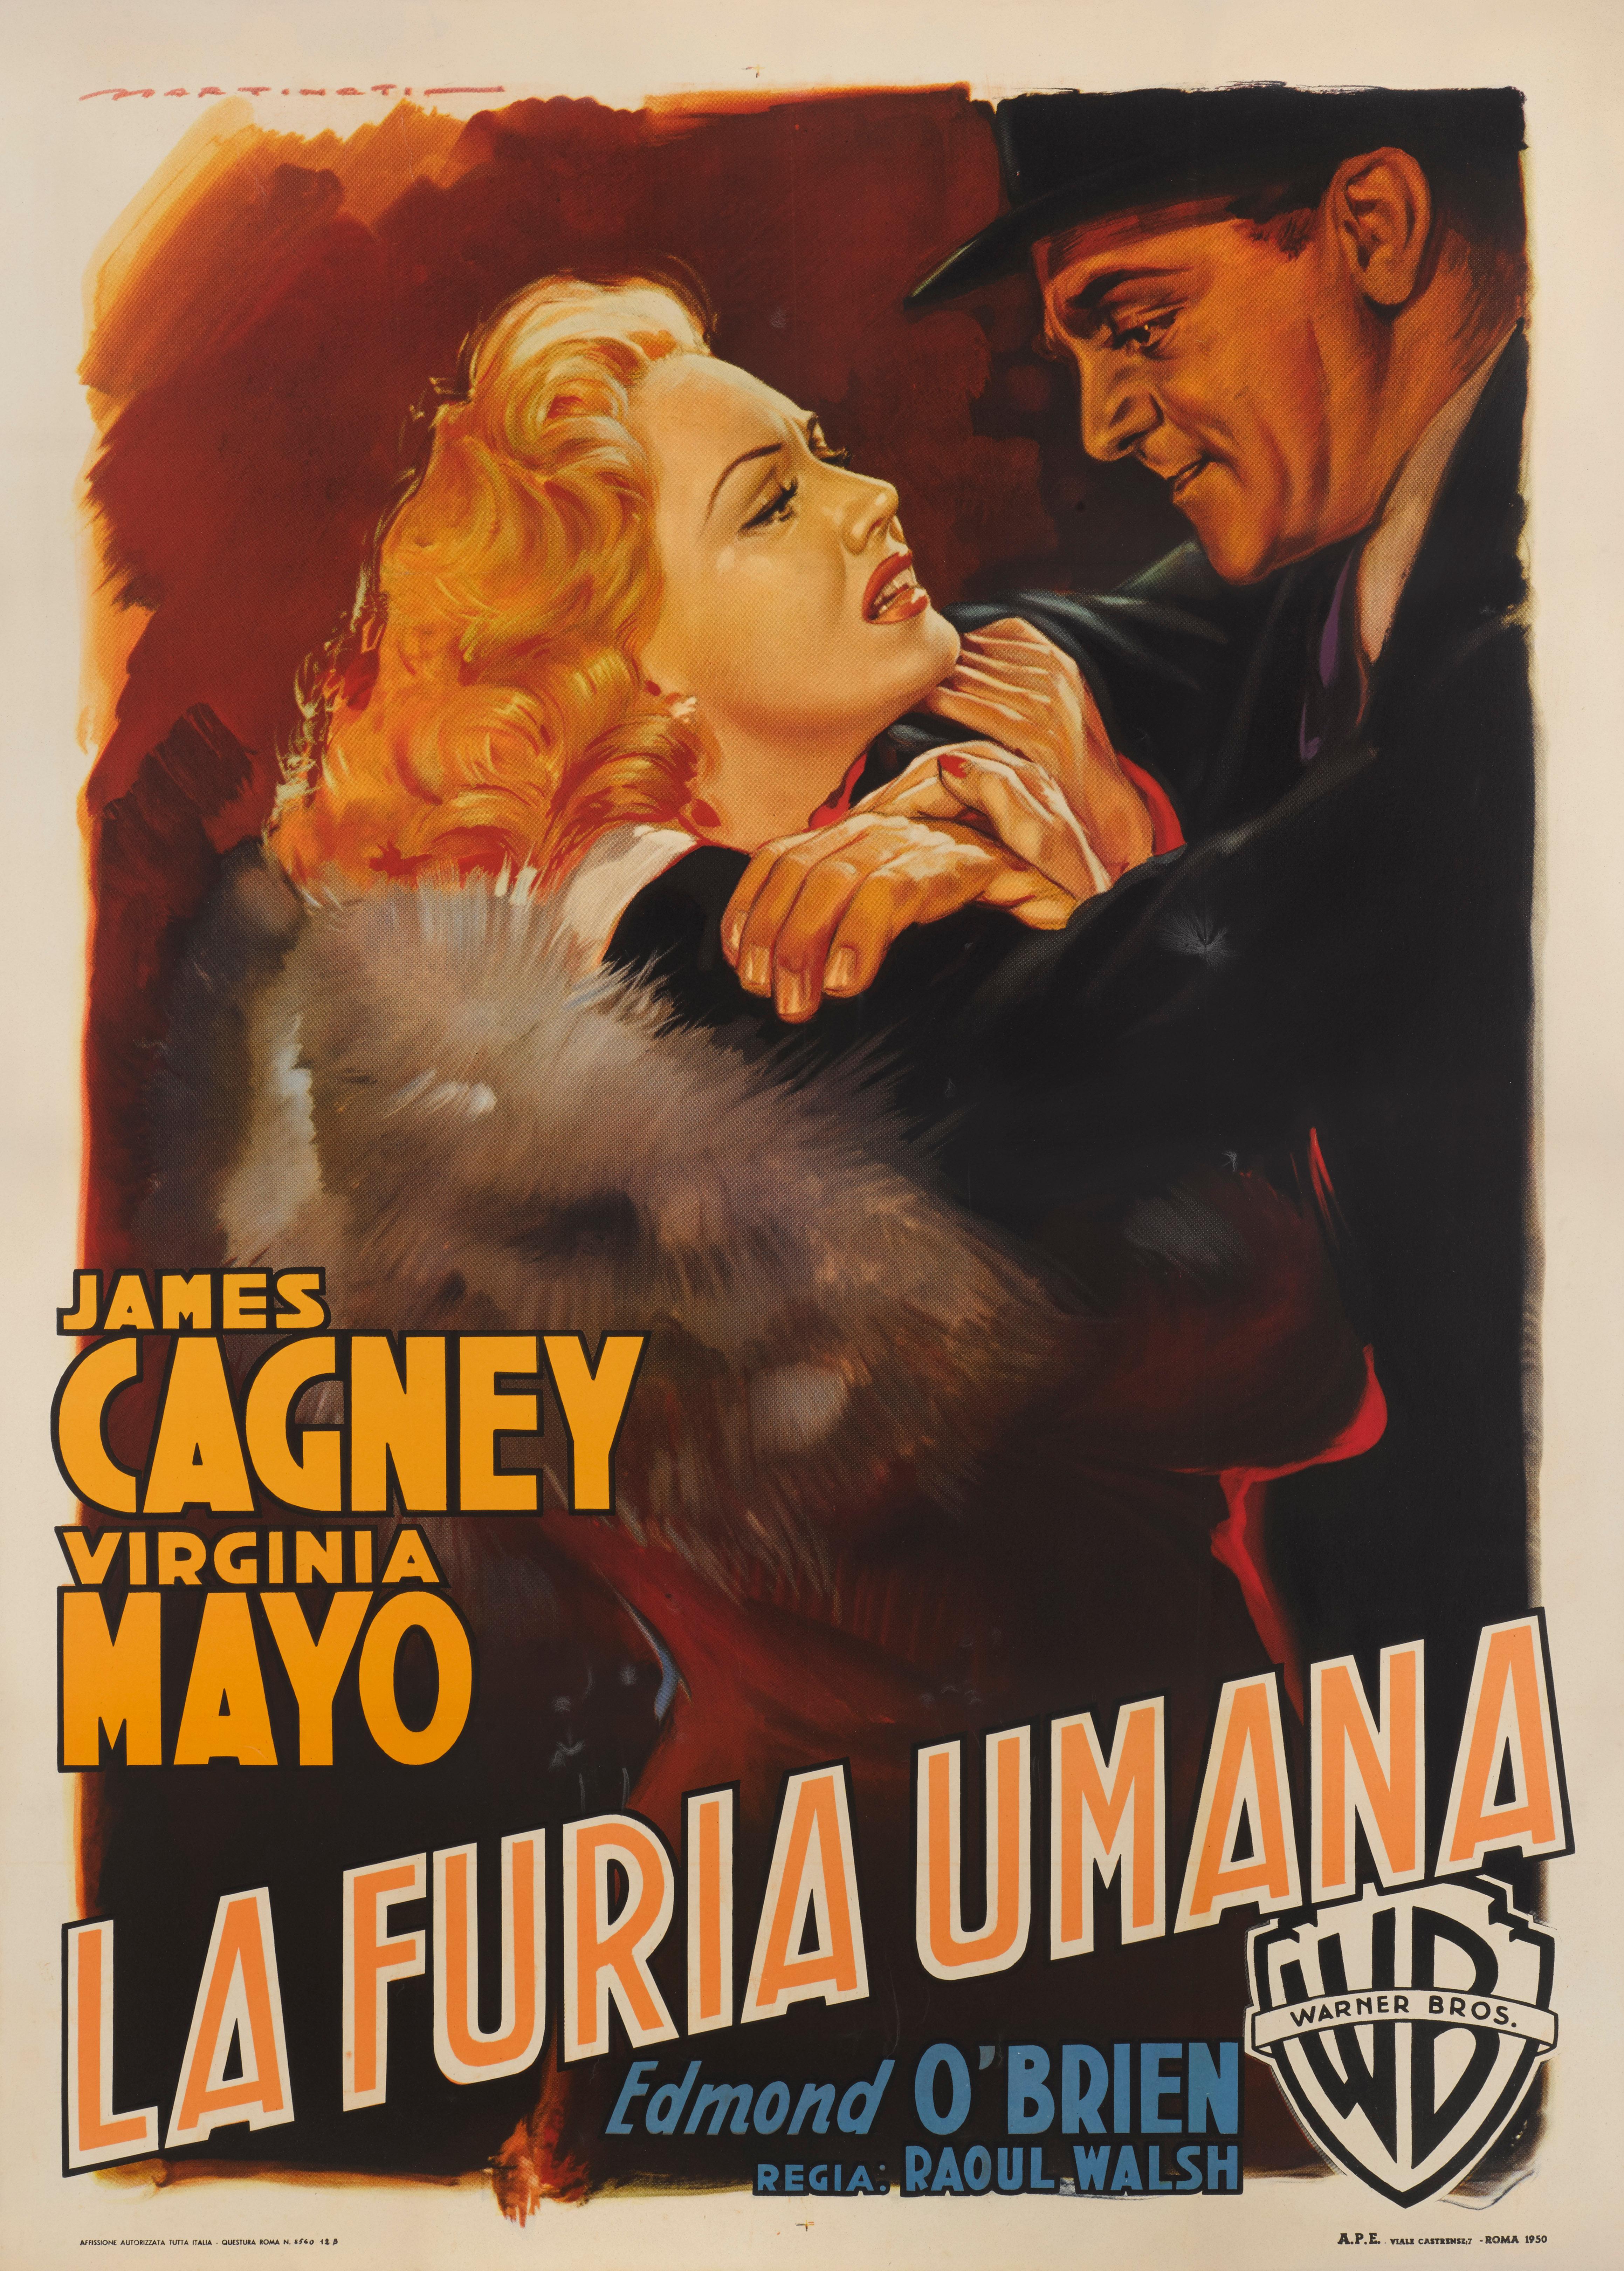 Original Italian film poster for White Heat, 1949. This film was directed by Raoul Walsh, and stars James Cagney, Virginia Mayo and Edmond O'Brien. Cagney was synonymous with gangster roles as he had played these parts since Public Enemy in 1931. He